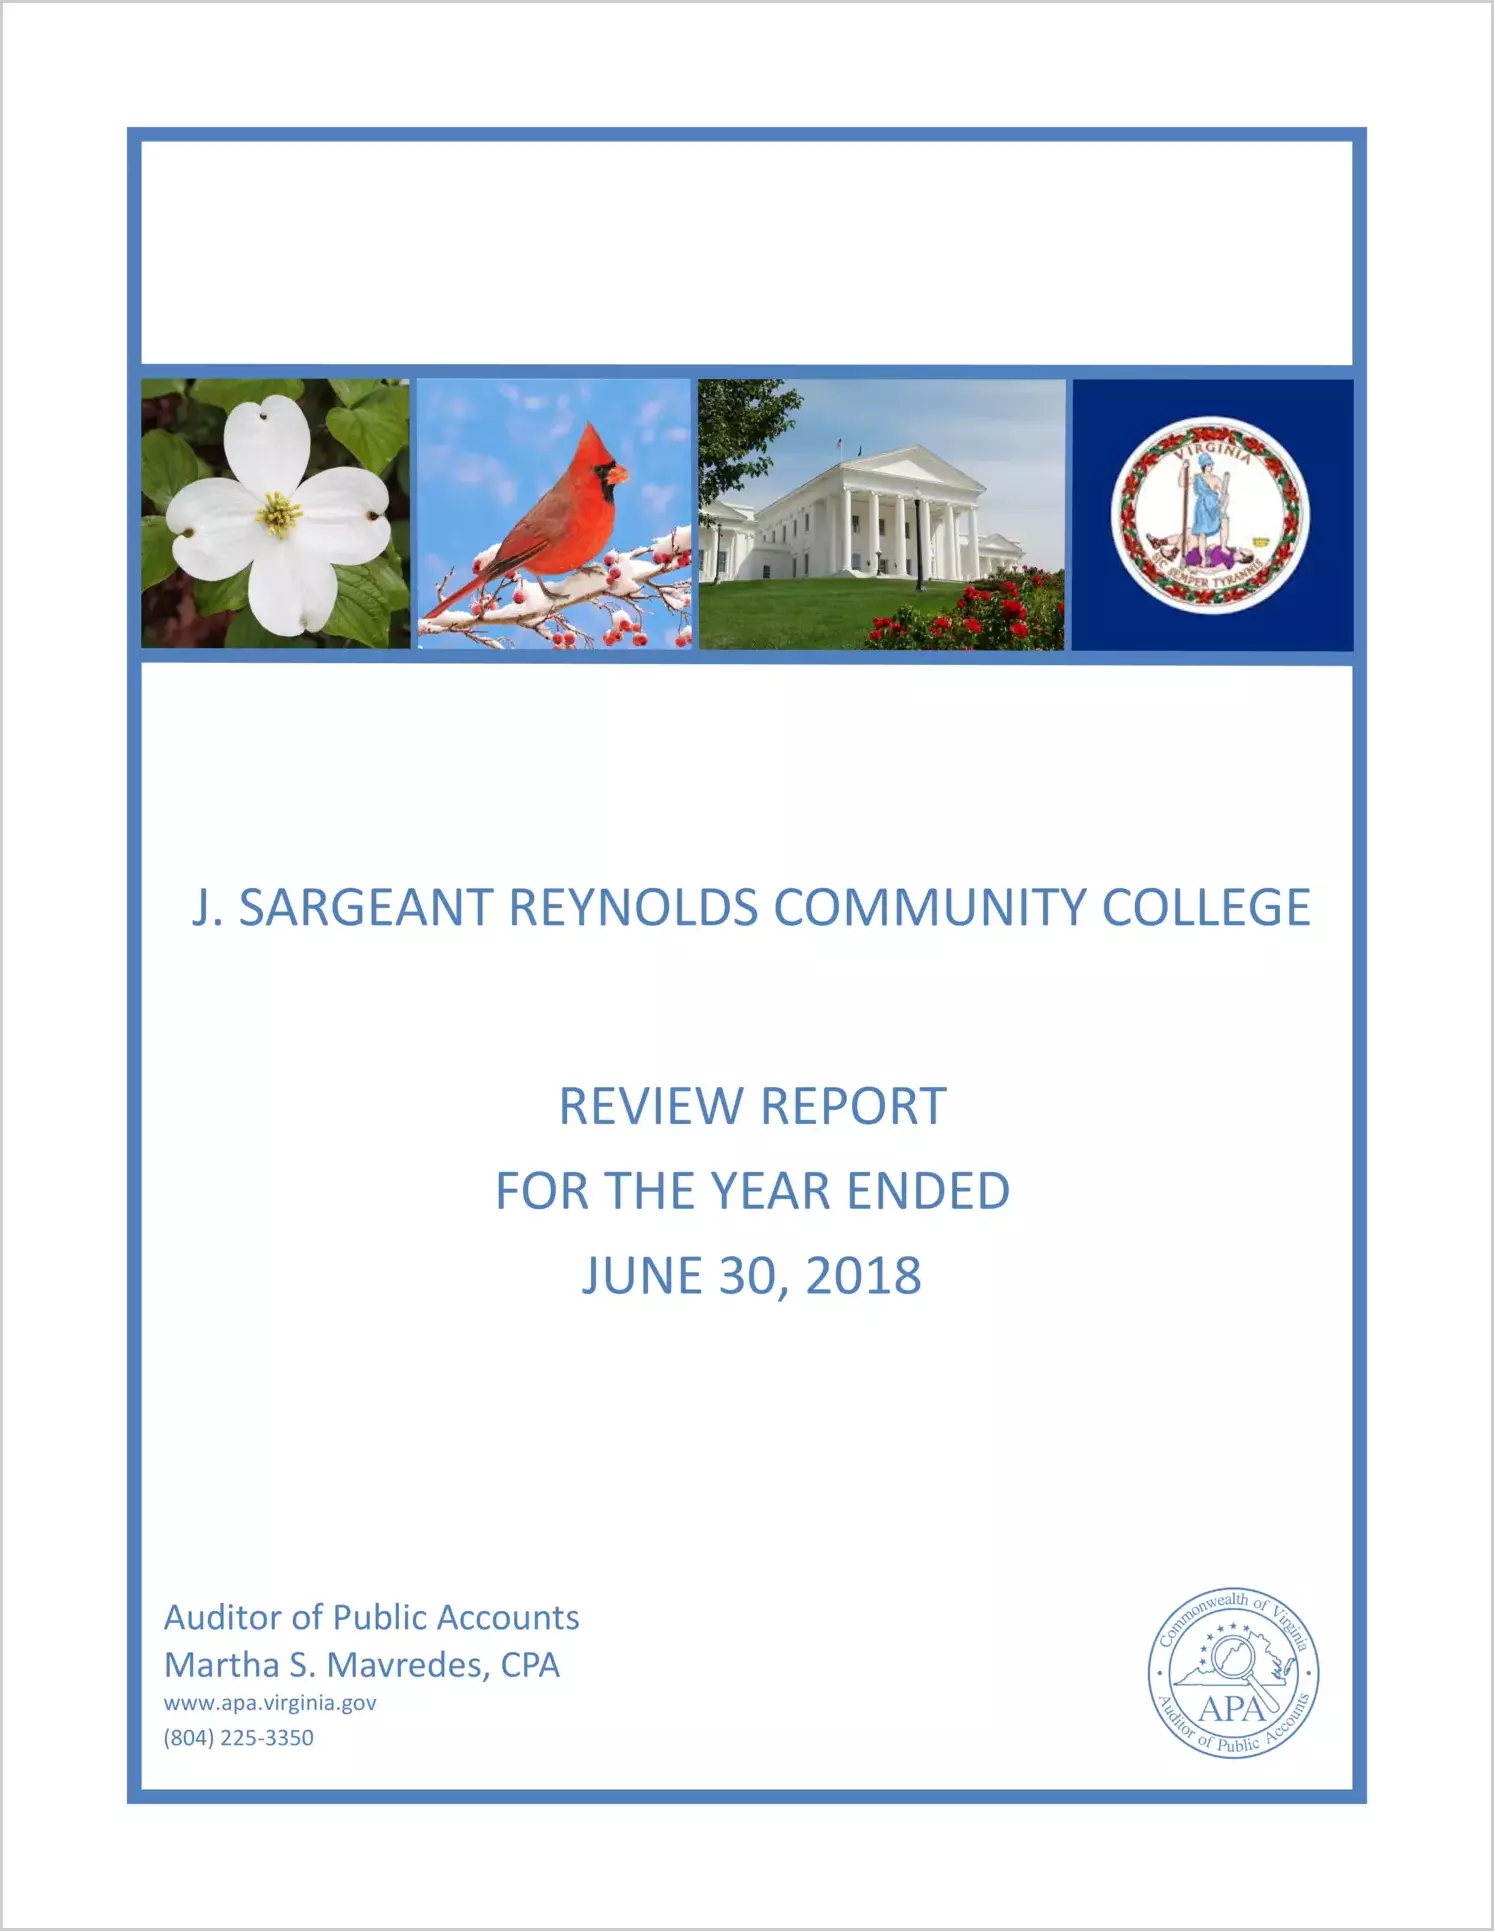 J. Sargeant Reynolds Community College Review for the year ended June 30, 2018